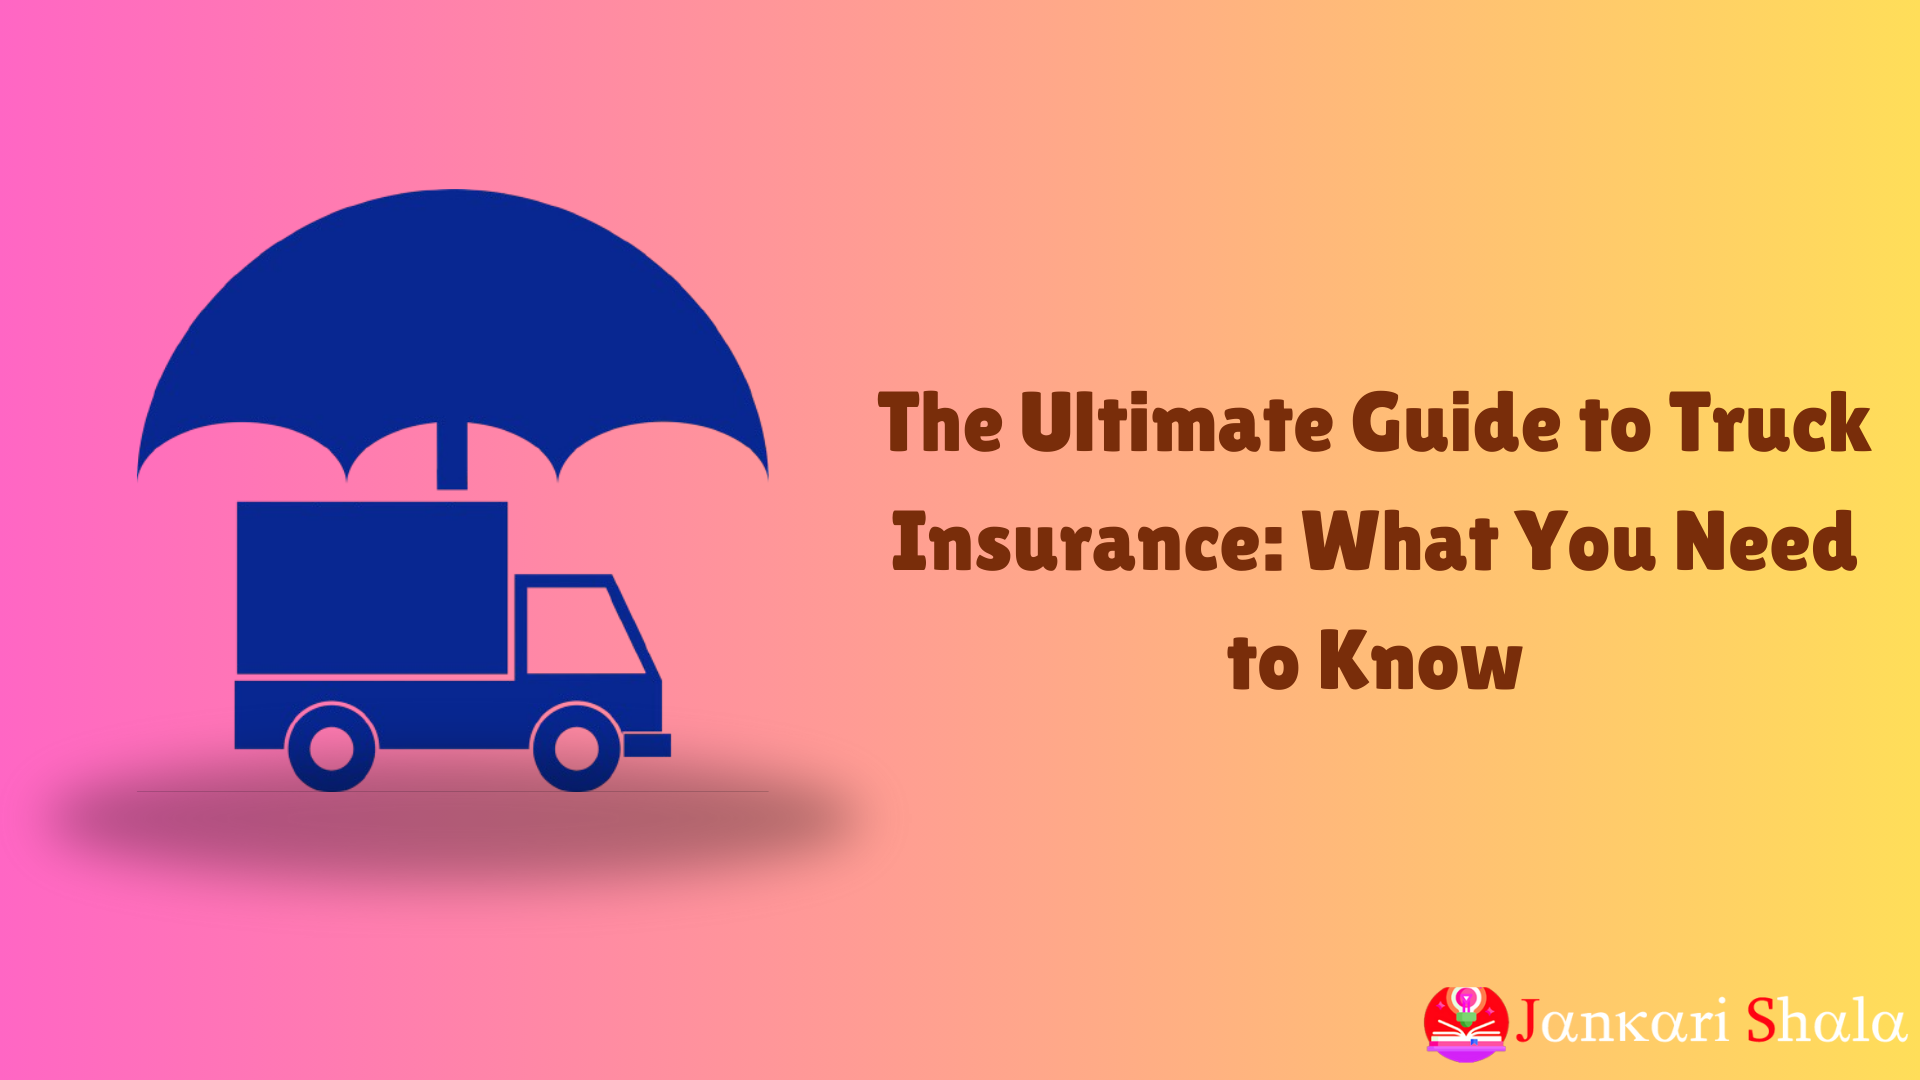 The Ultimate Guide to Truck Insurance: What You Need to Know